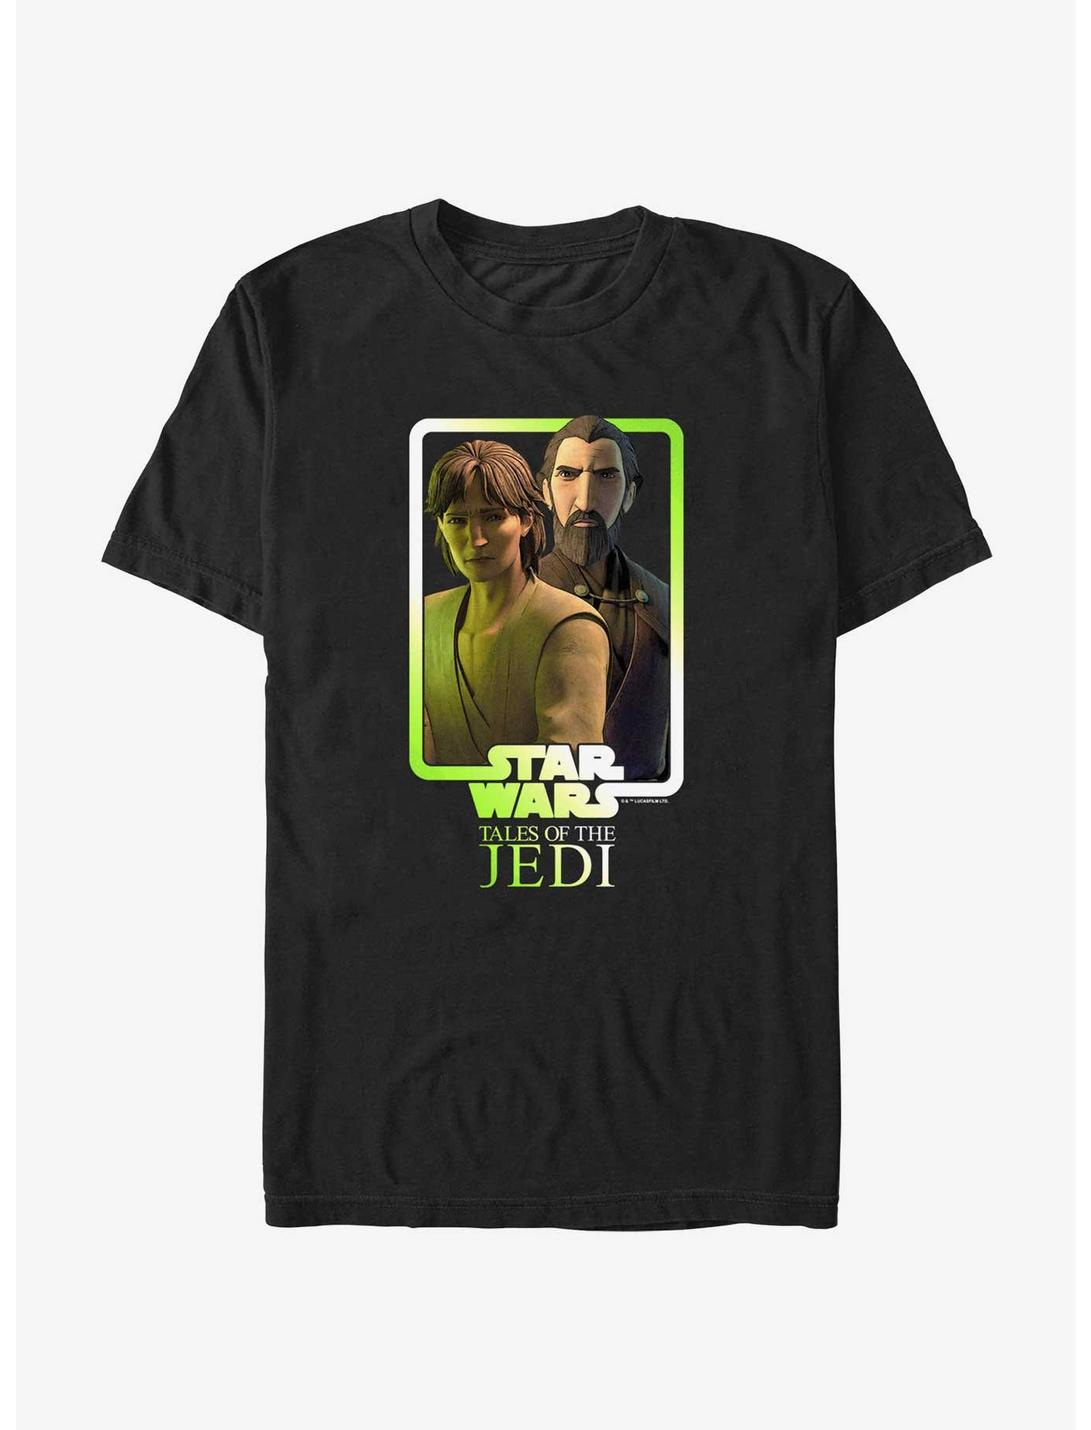 Star Wars: Tales of the Jedi Master and Apprentice Count Dooku and Qui-Gon Jinn T-Shirt, BLACK, hi-res